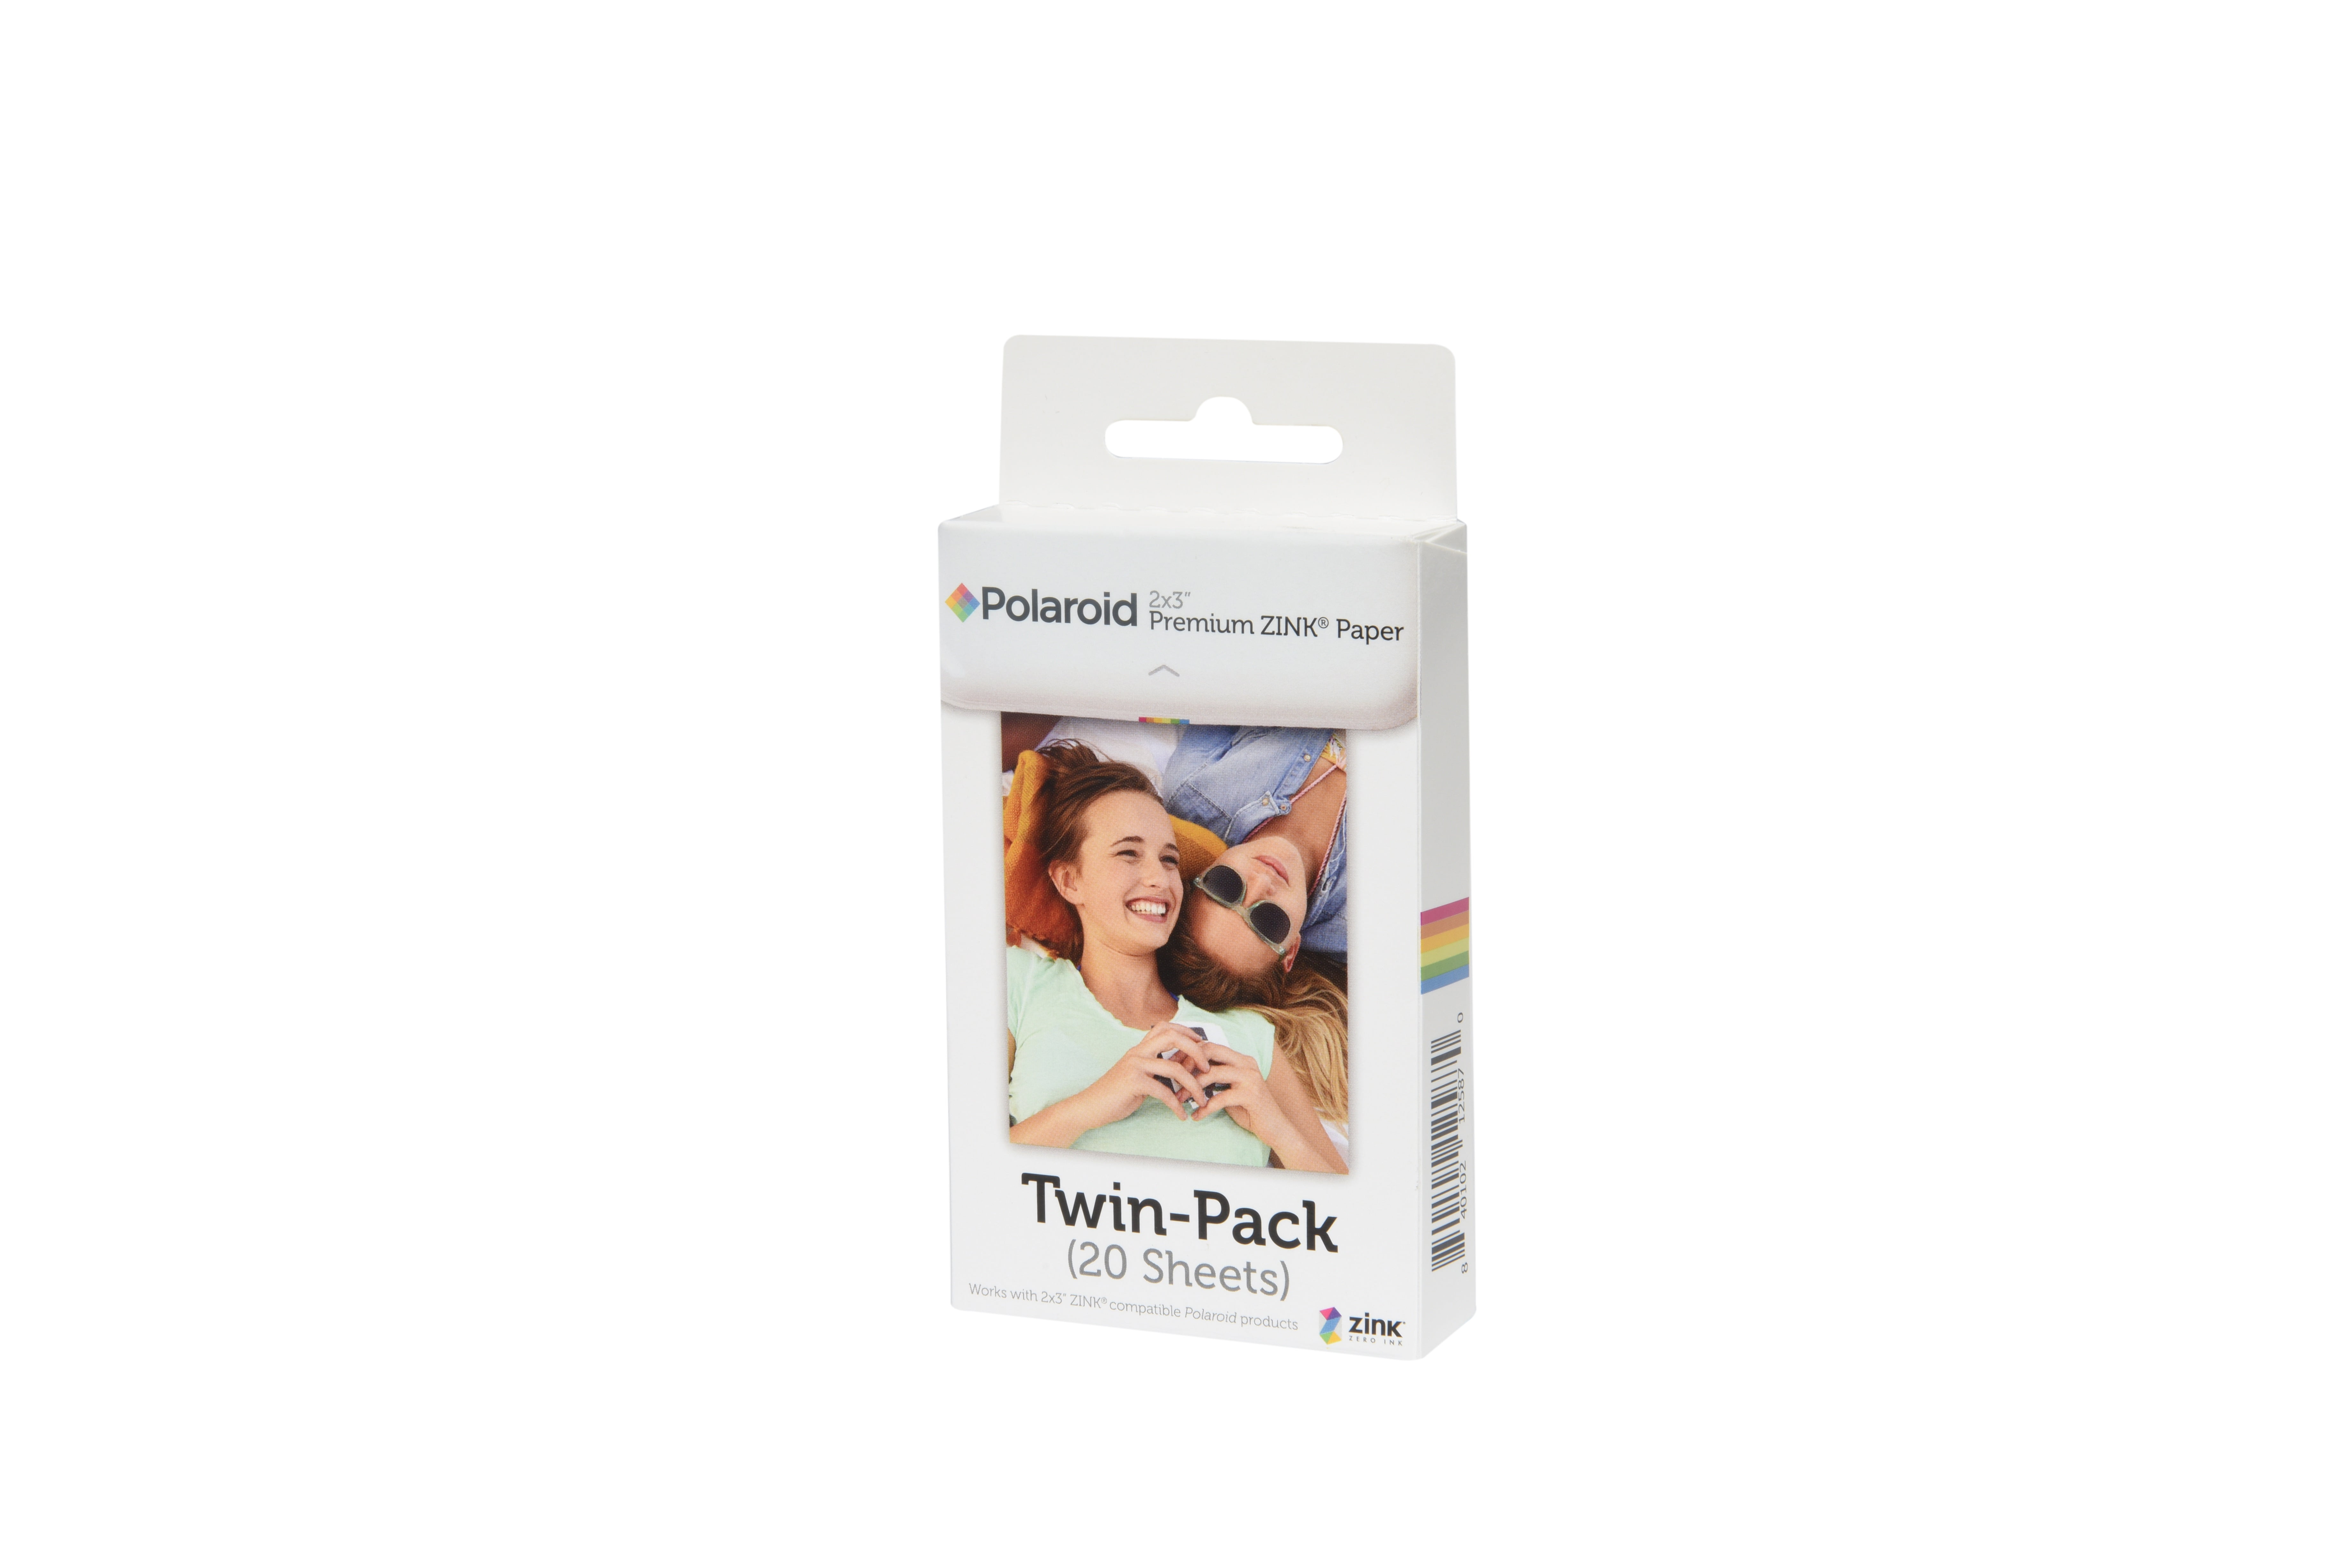 Polaroid Snap Instant Digital Camera White w// 20 Twin Pack Zink 2x3 Photo Paper